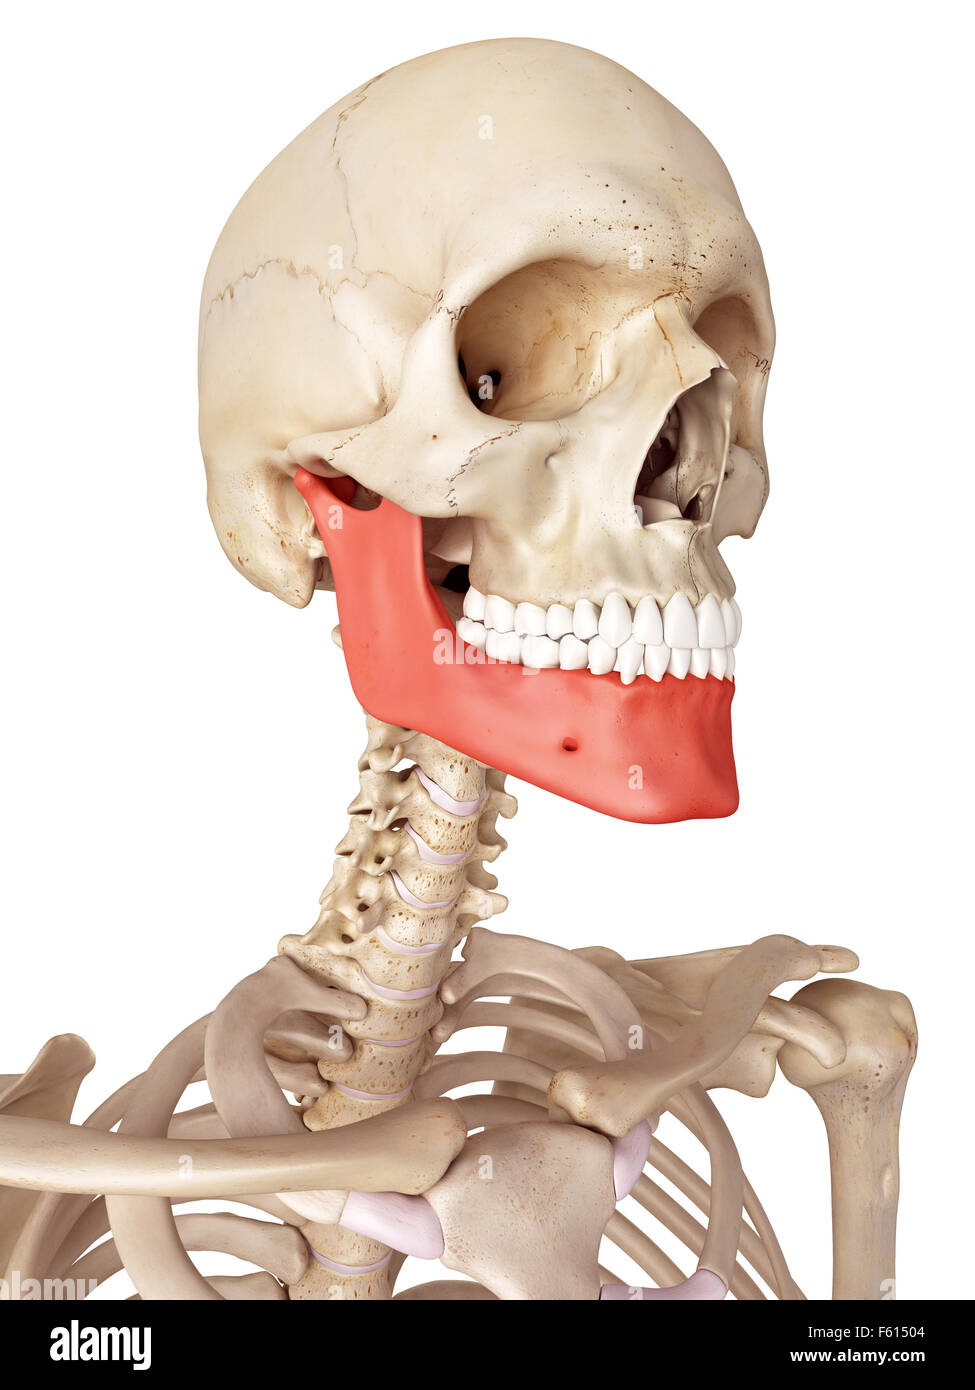 Human Jaw Bone High Resolution Stock Photography and Images - Alamy